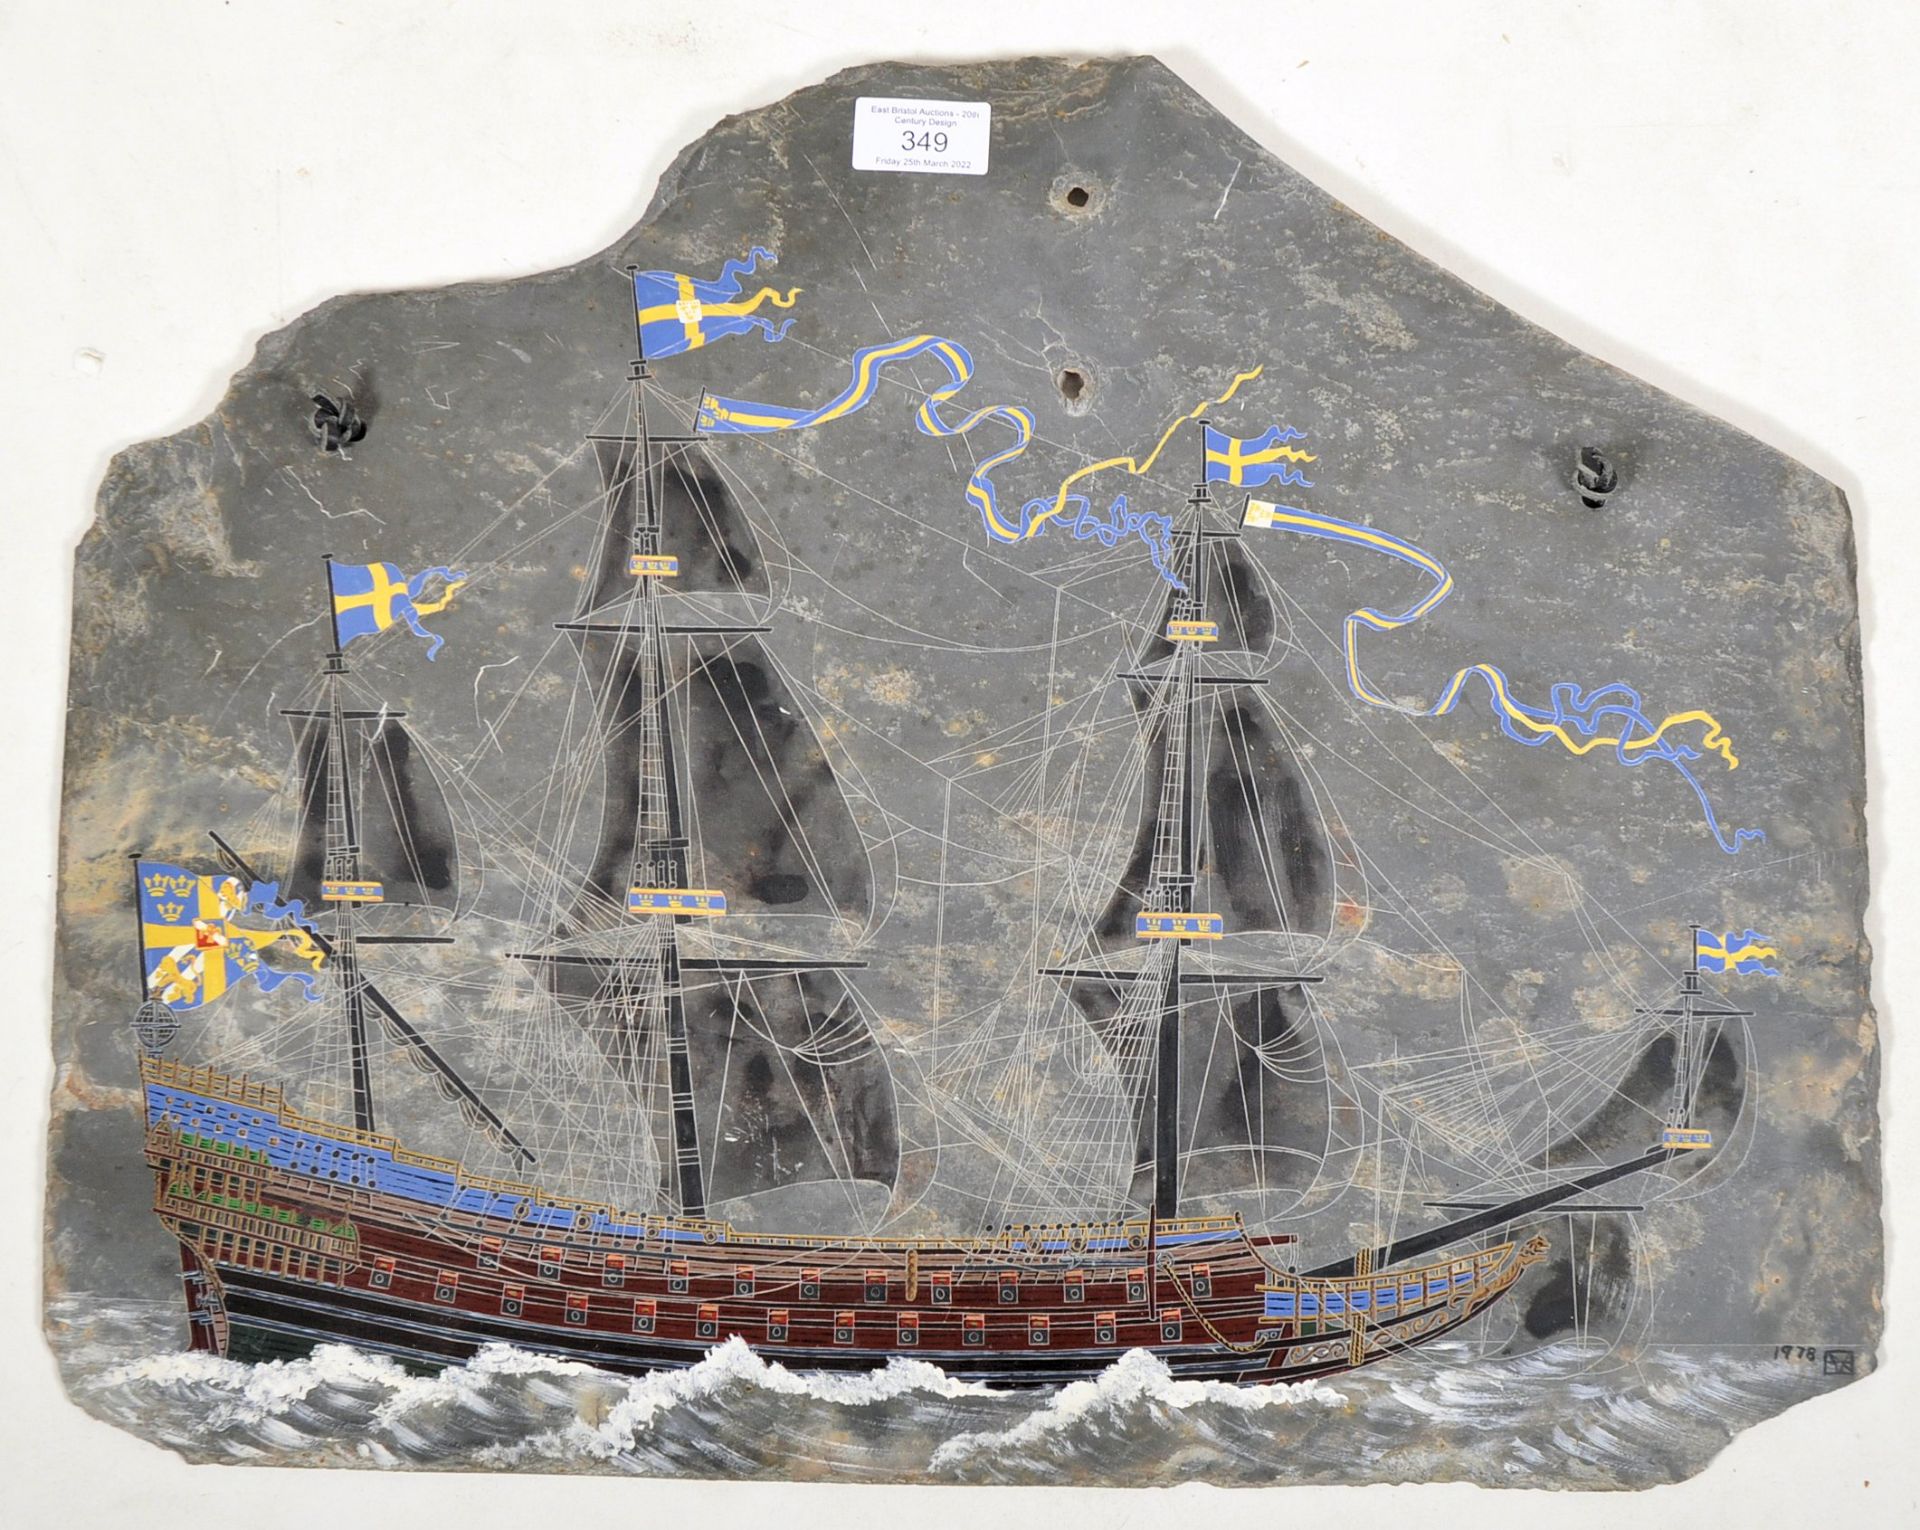 SLATE PANEL WITH HAND PAINTED 17TH CENTURY SWEDISH GALLEON